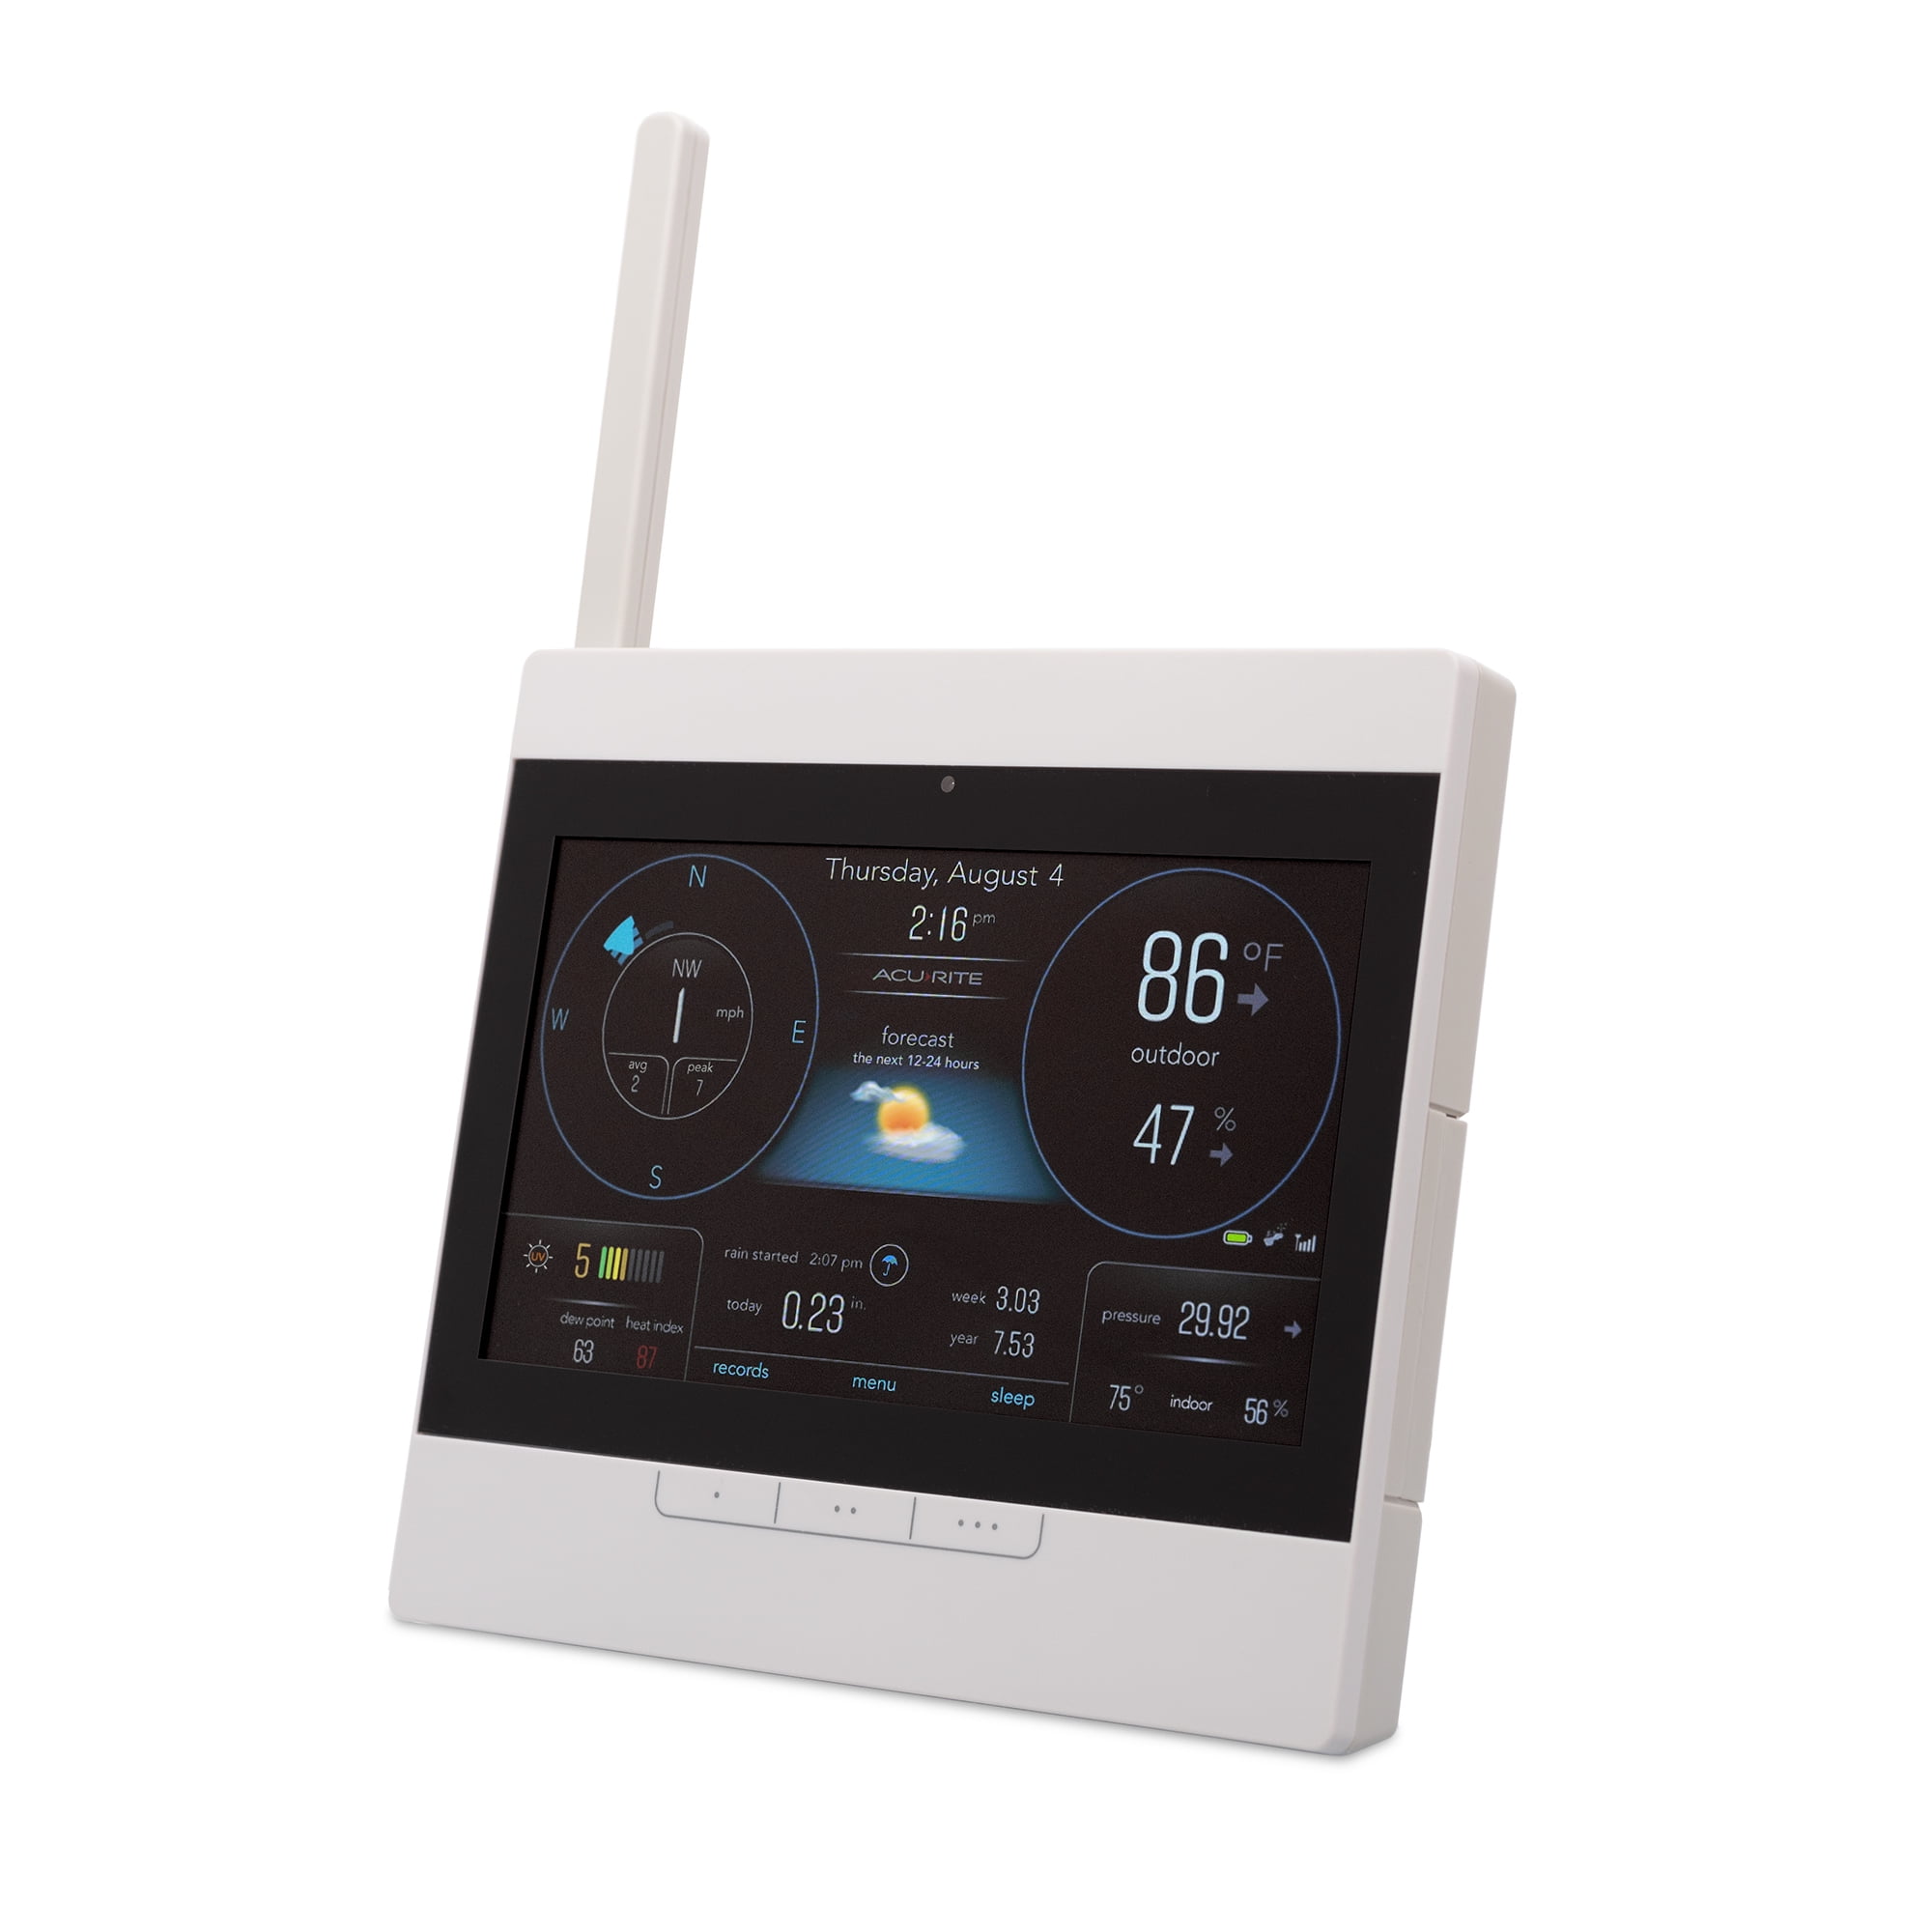 Acurite Atlas Weather Station with White HD Display for Temperature, Humidity, Wind Speed/Direction with Built-in Barometer (01127m)